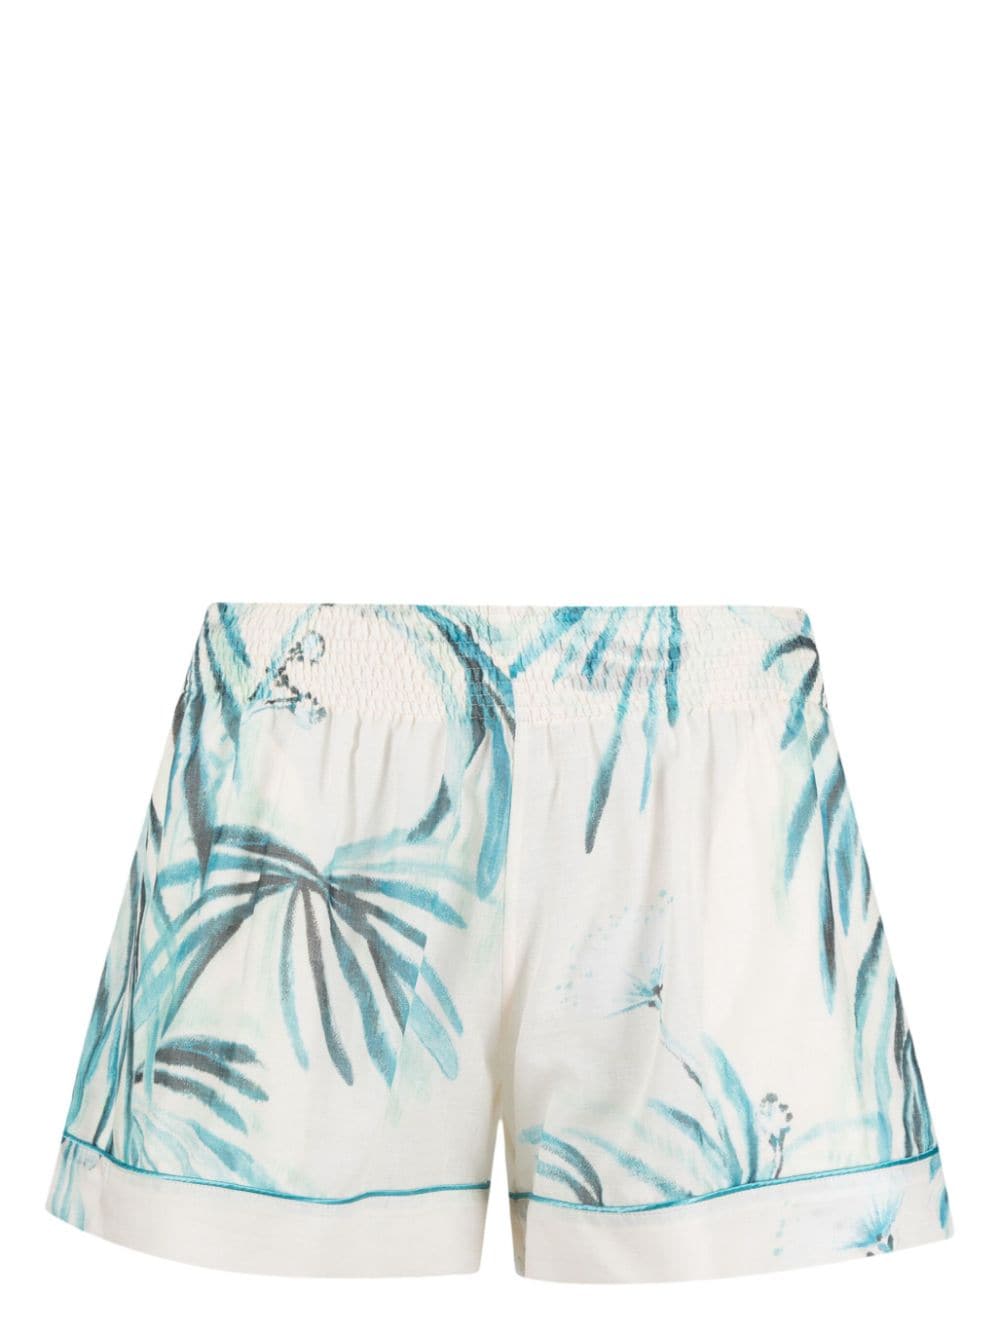 F.R.S For Restless Sleepers botanical-print cotton shorts - White von F.R.S For Restless Sleepers